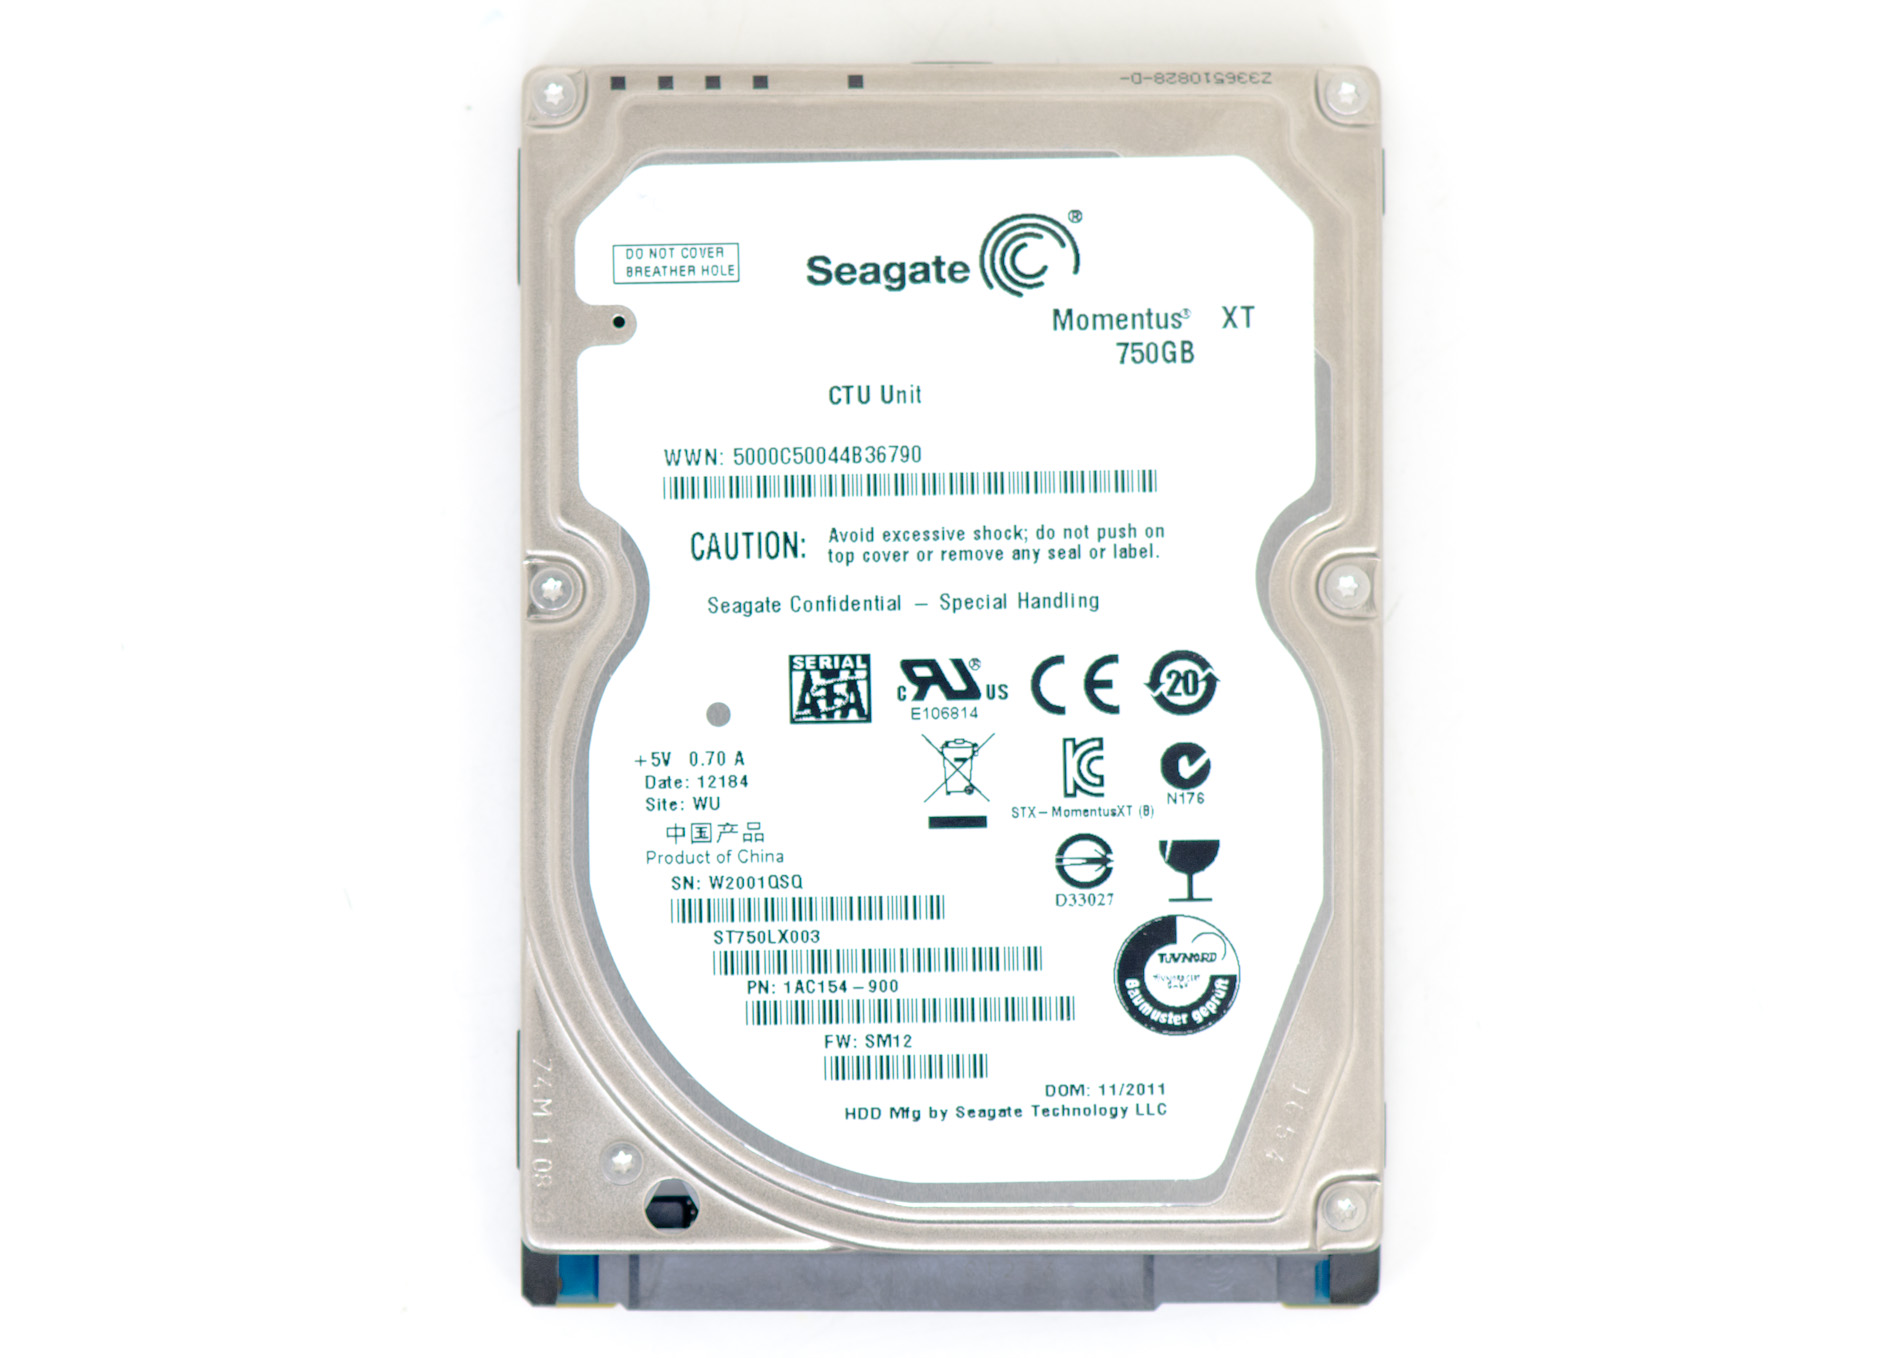 Seagate 2nd Generation Momentus XT (750GB) Hybrid HDD Review